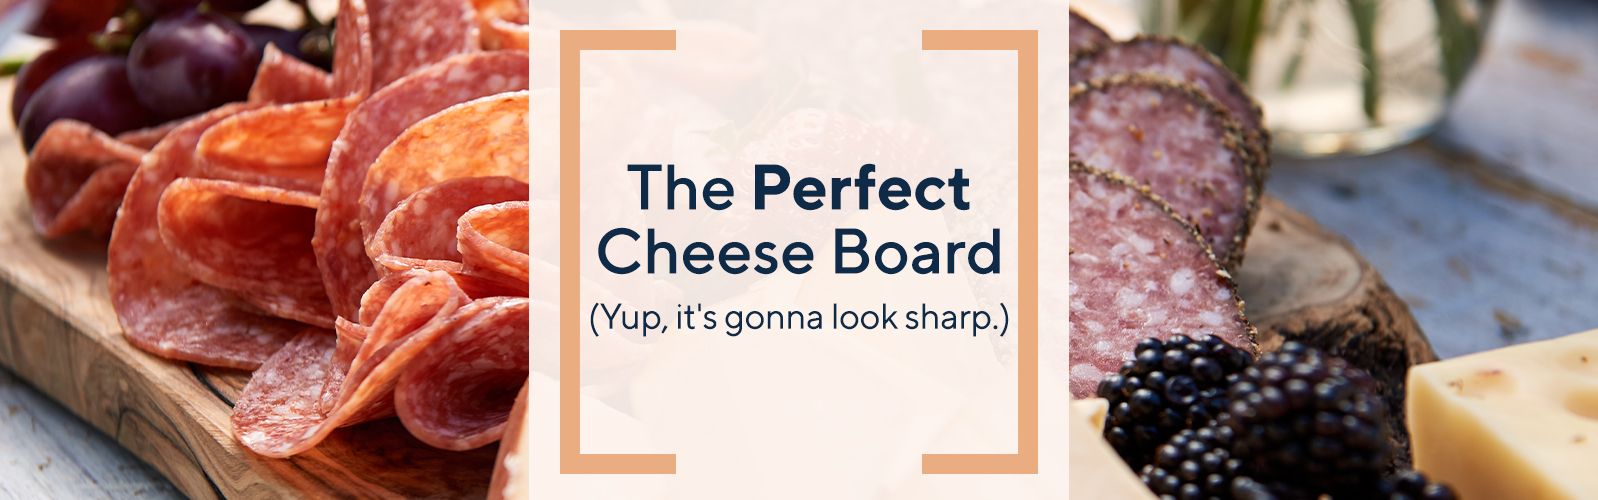 The Perfect Cheese Board (Yup, it's gonna look sharp.)  